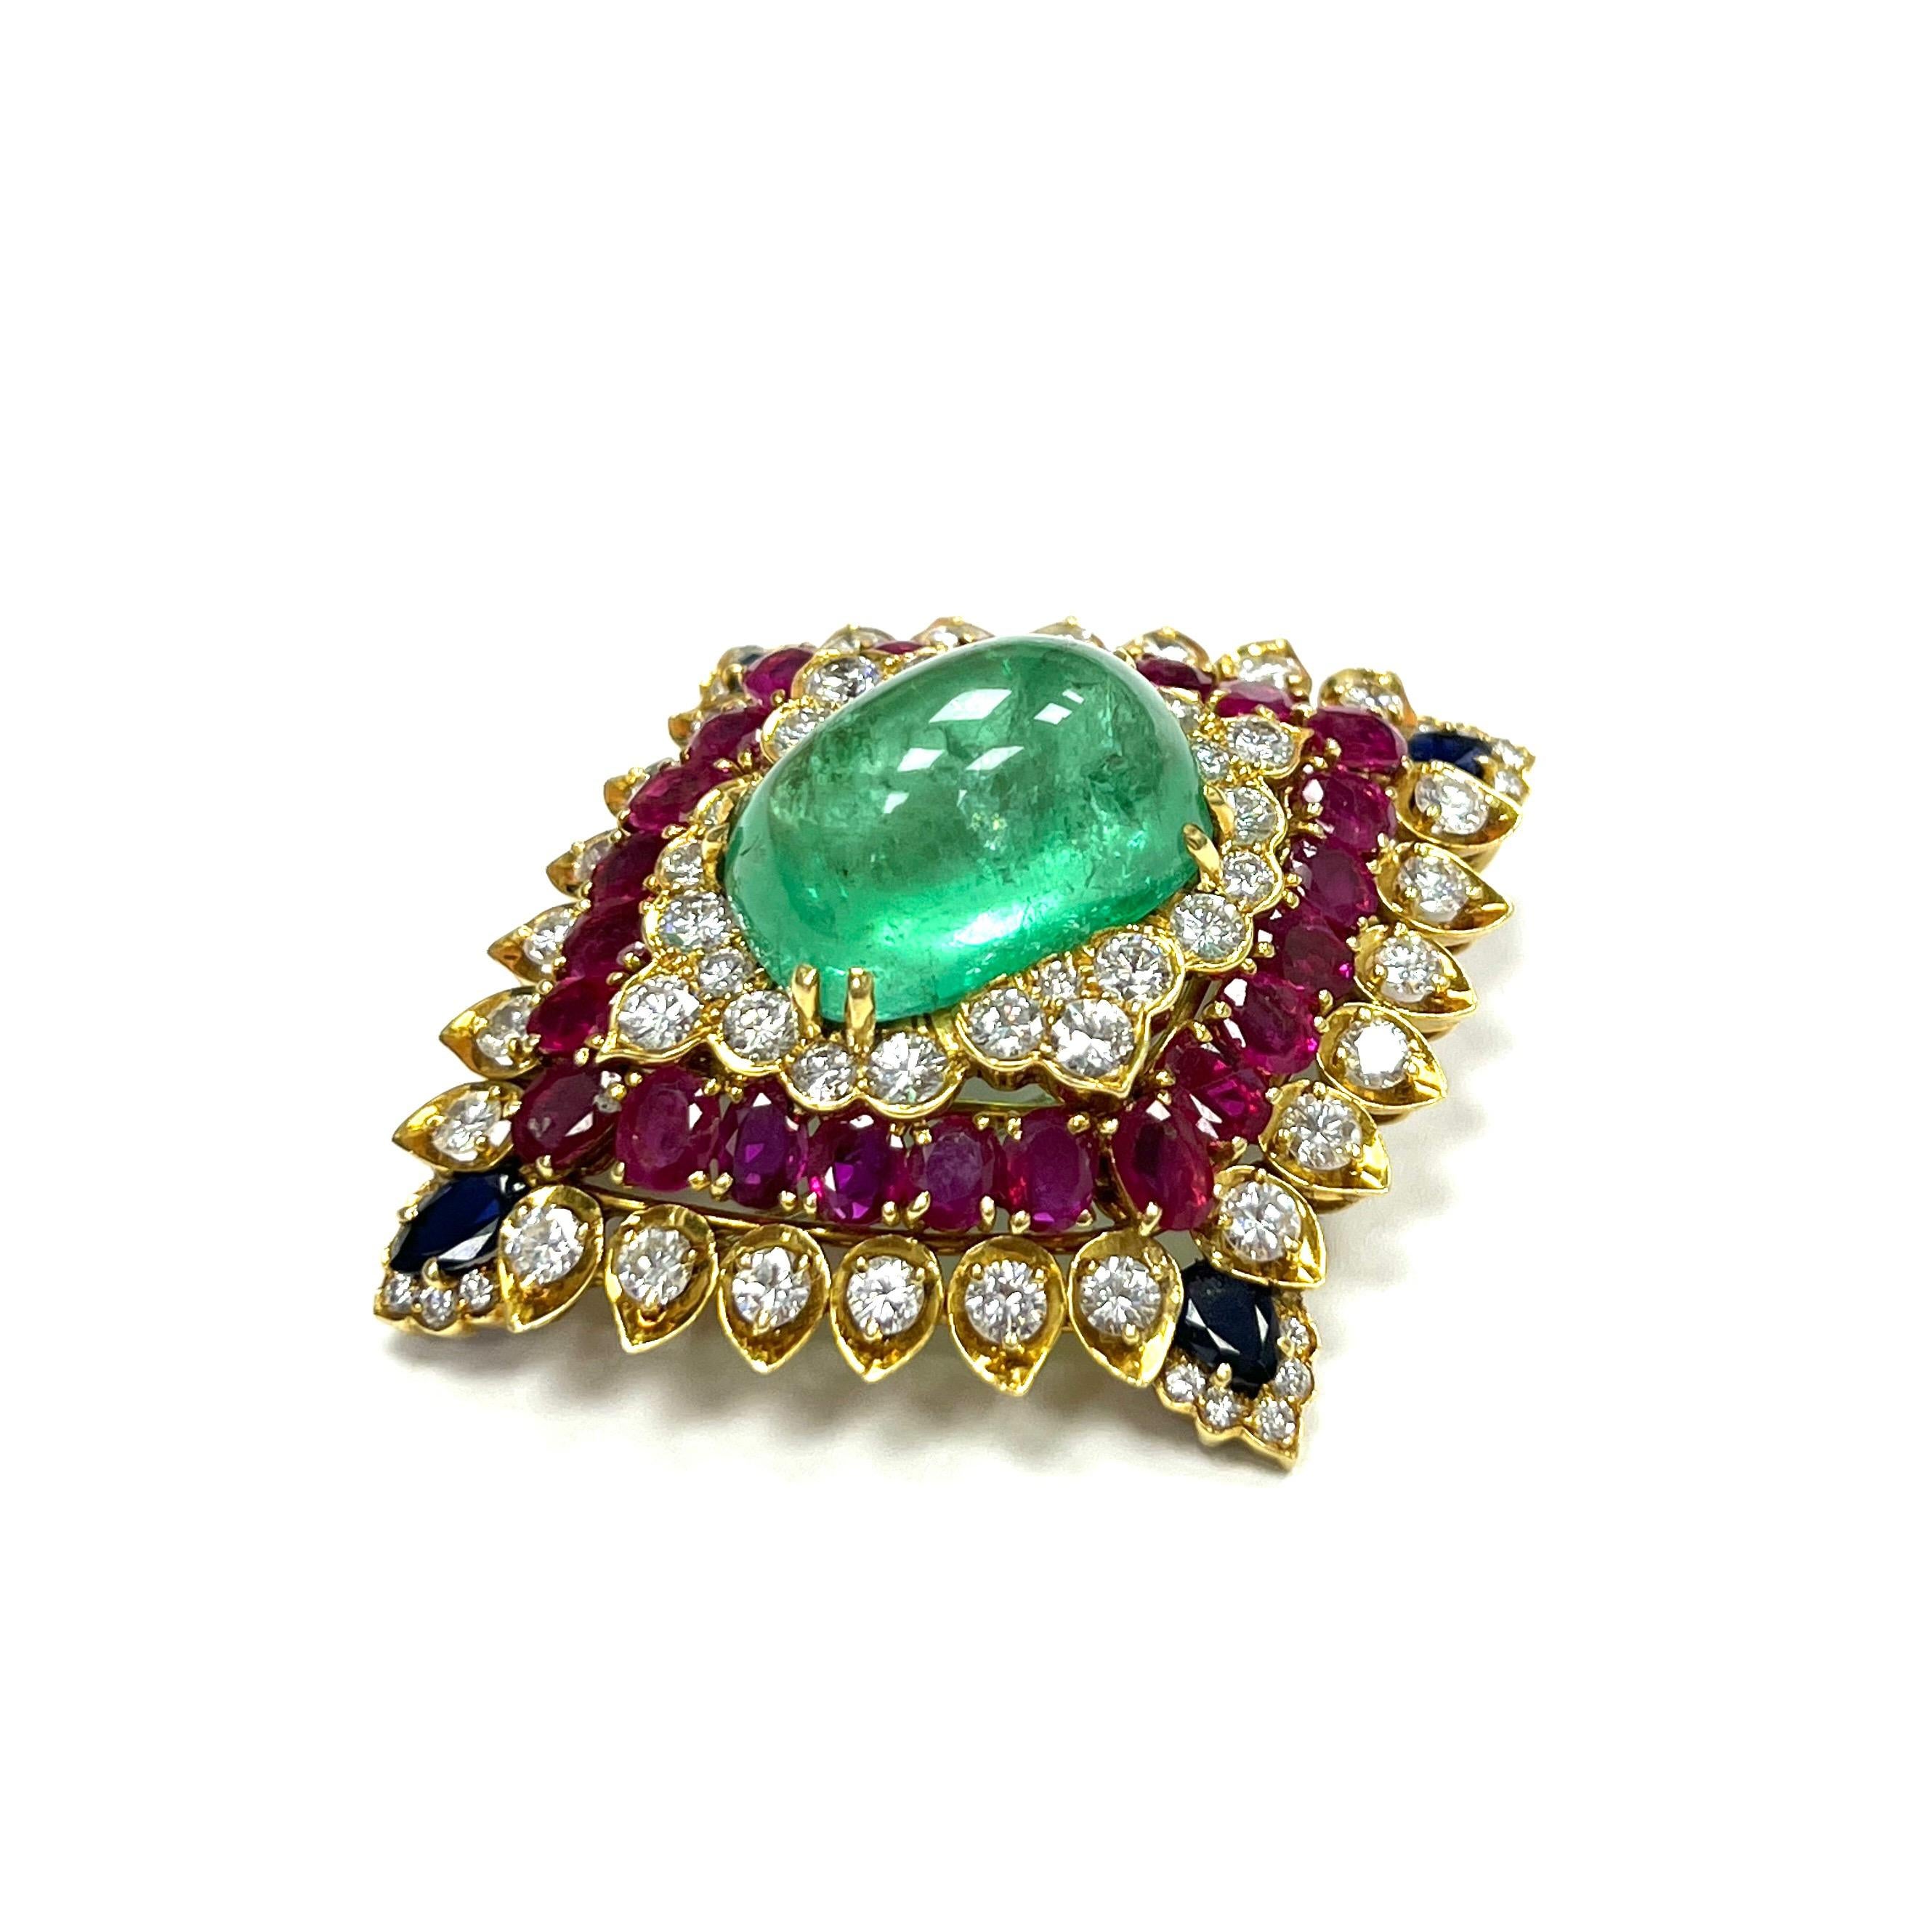 David Webb Emerald Diamond Ruby Sapphire 18k Brooch

Large cabochon emerald (13.5 x 20 mm) of approximately 22- 25 carats, round-cut diamonds of approximately 8 carats, oval-shaped rubies of approximately 10 carats, and pear-shaped sapphires of